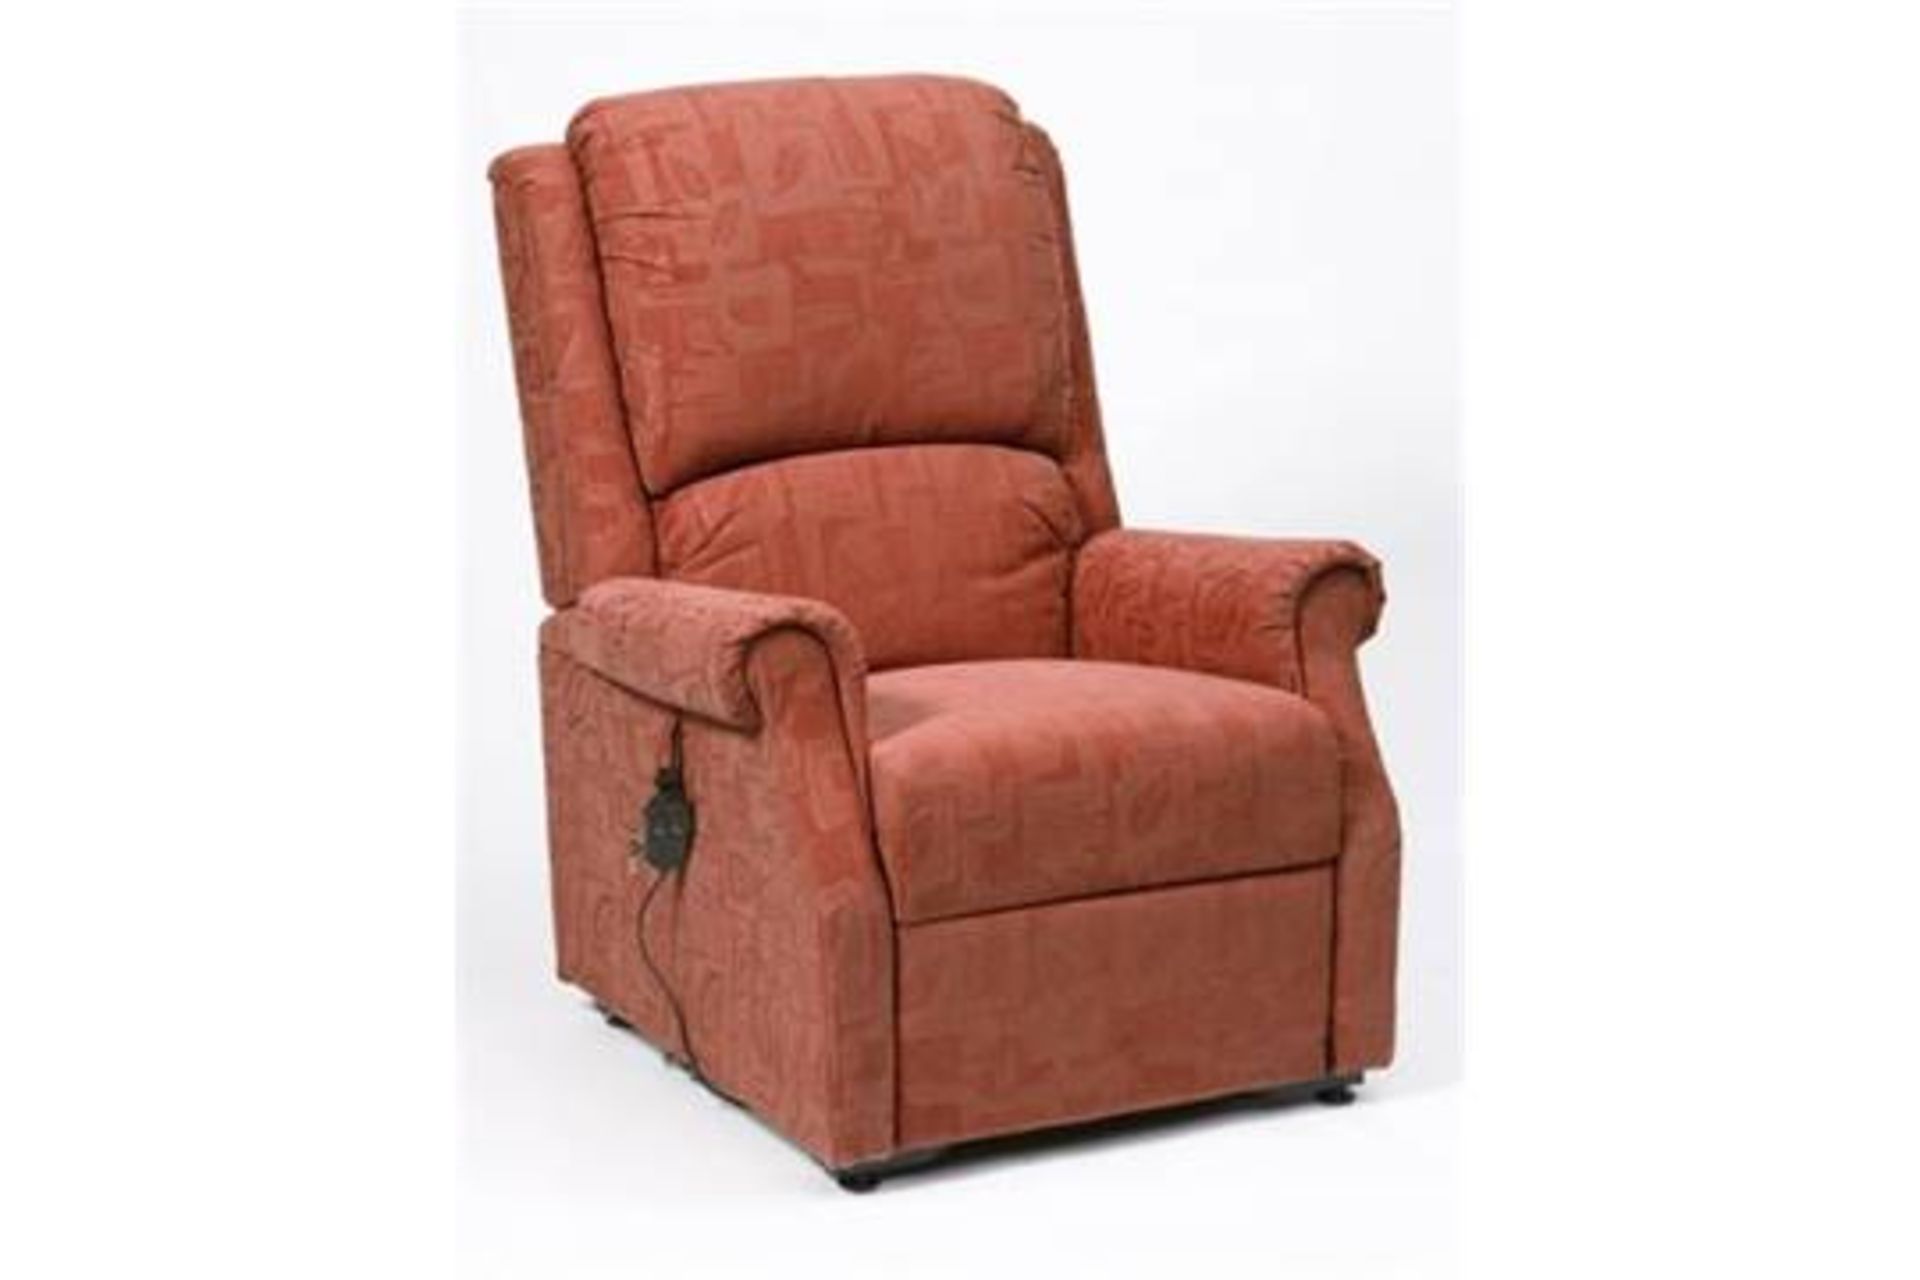 V Red Velour Rise & Recline Electric Chair With Remote Control Brand New In Box RRP £999